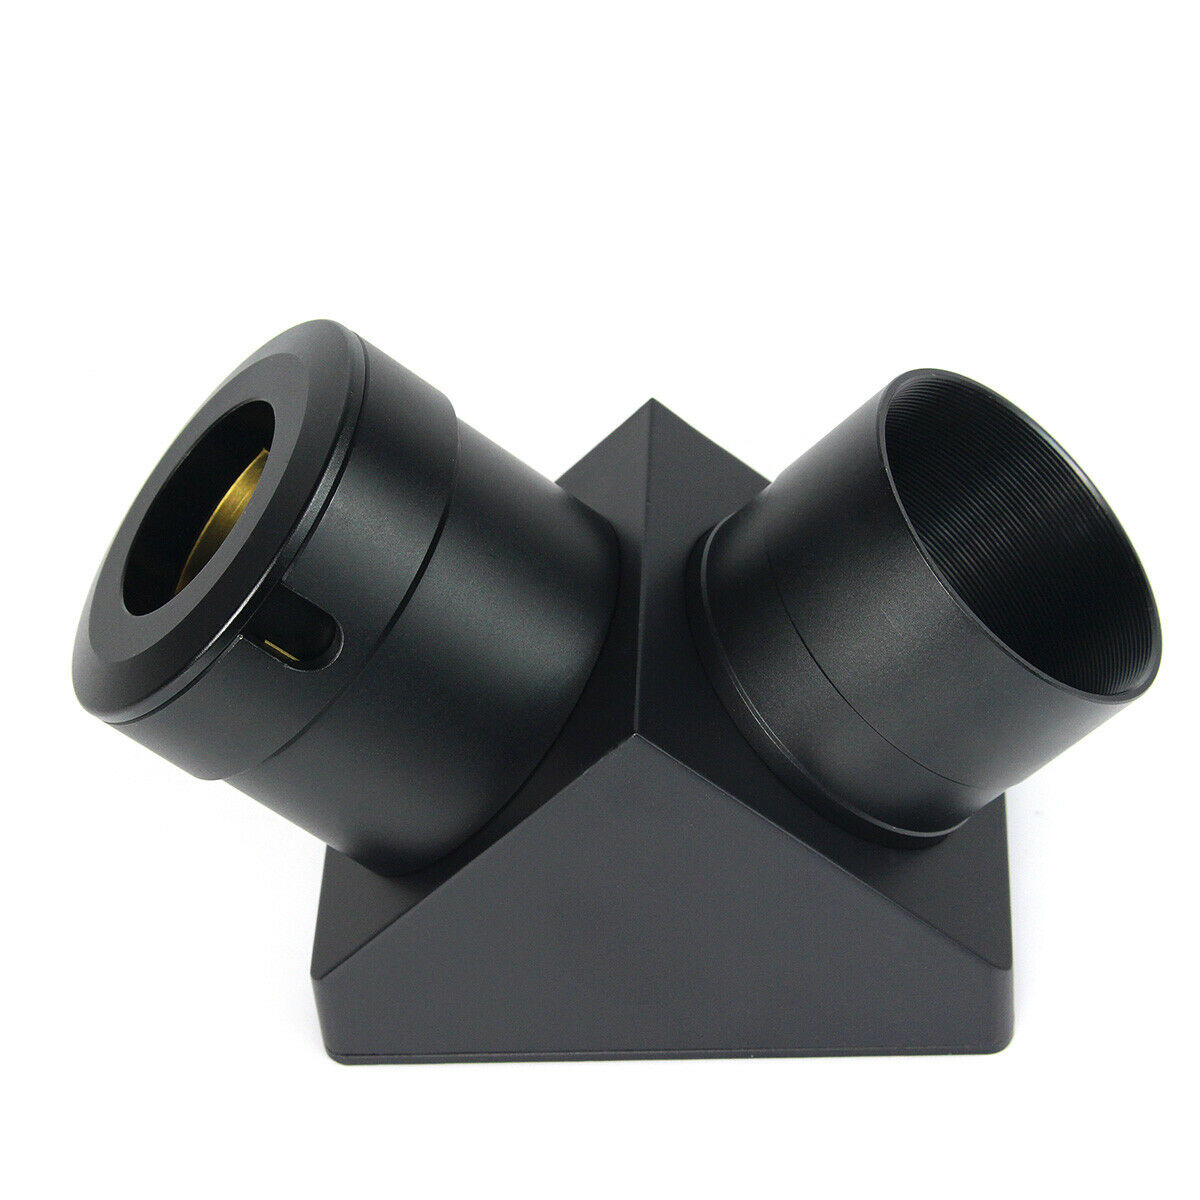 Pomya 1.25 inch 90 Degree Dielectric Mirror Diagonal Universal Accessories for 1.25 inch Focus Seat and 1.25 inch Eyepiece